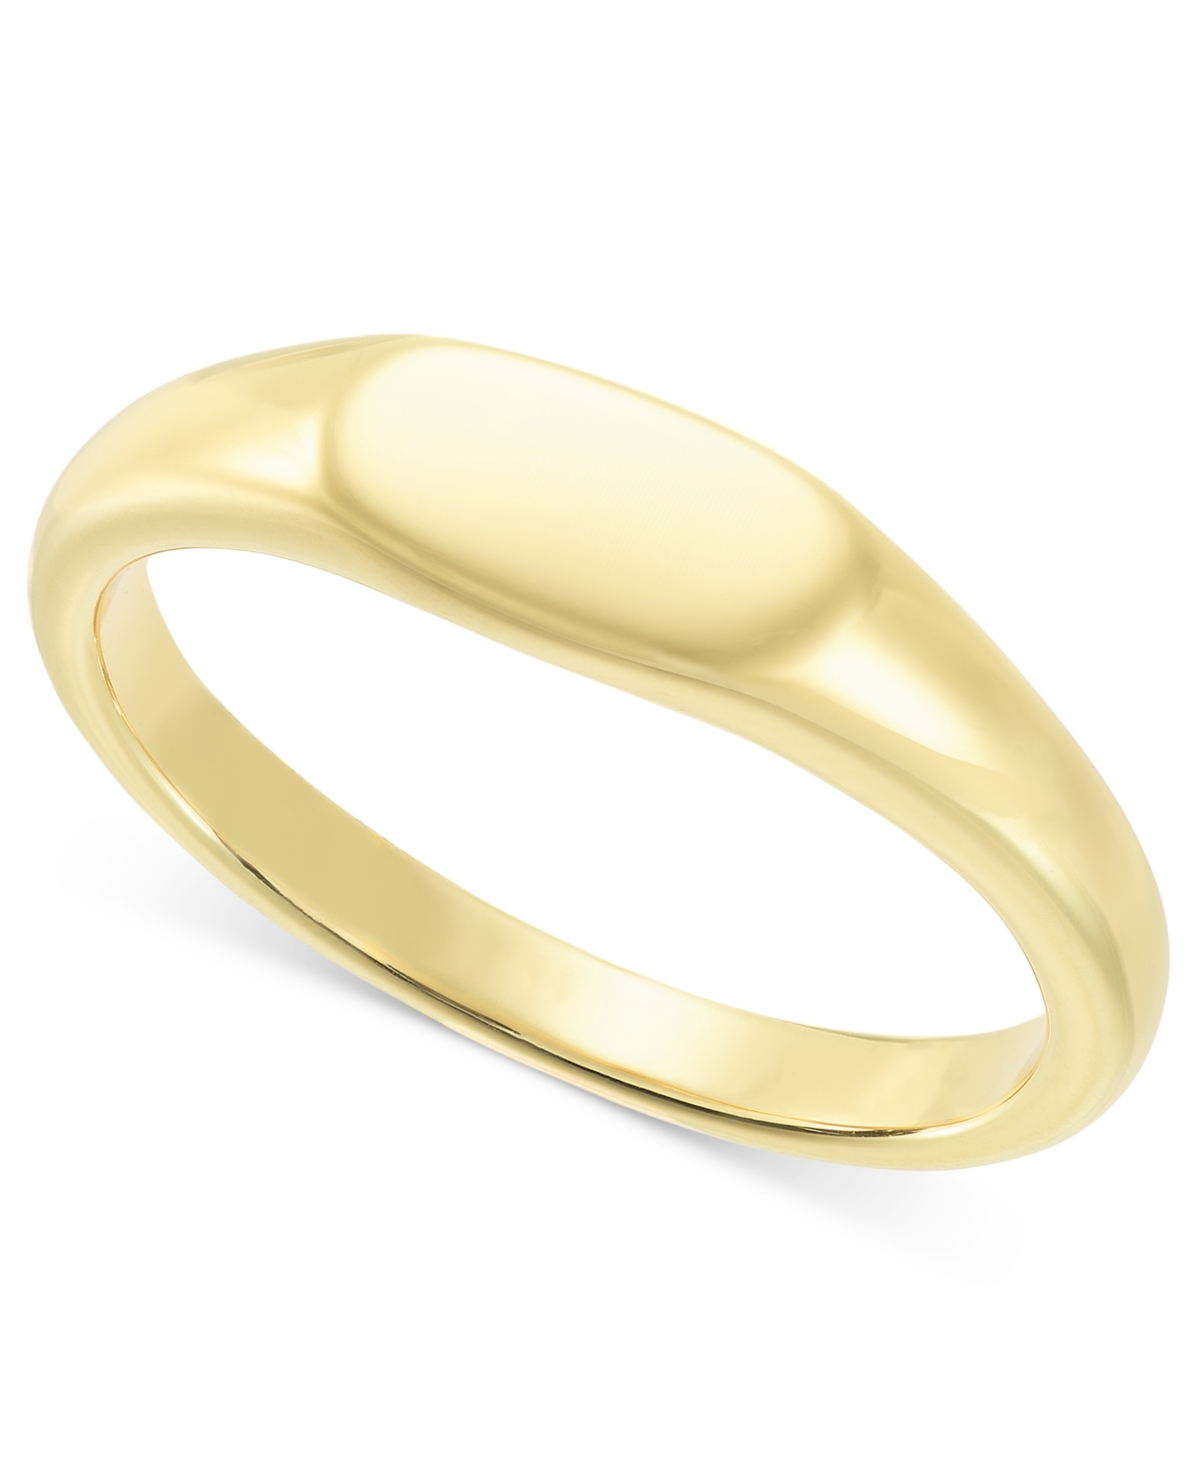 Gold-Tone Signet Ring, Created for Macy's - Gold